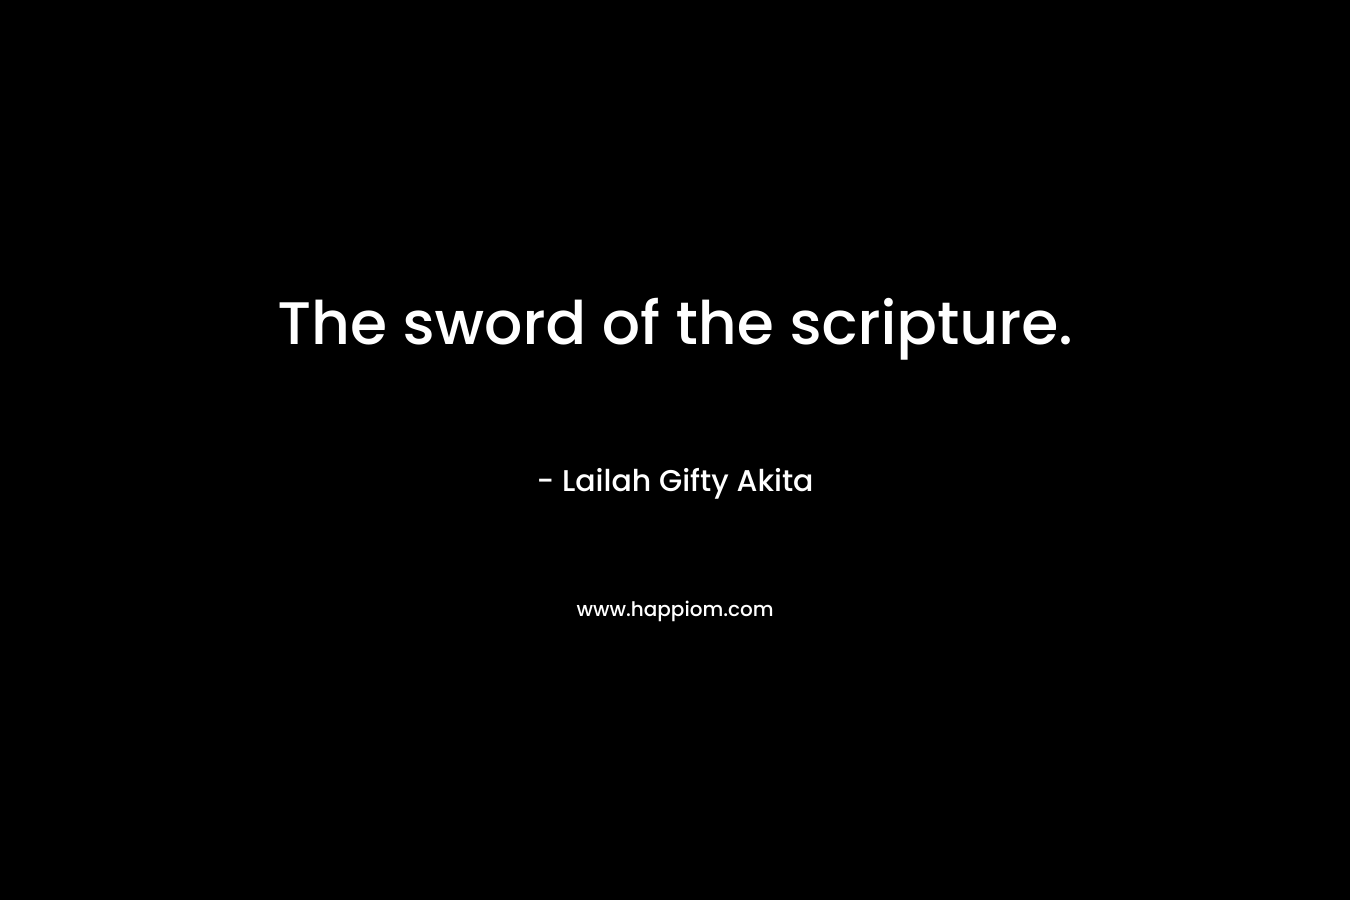 The sword of the scripture.